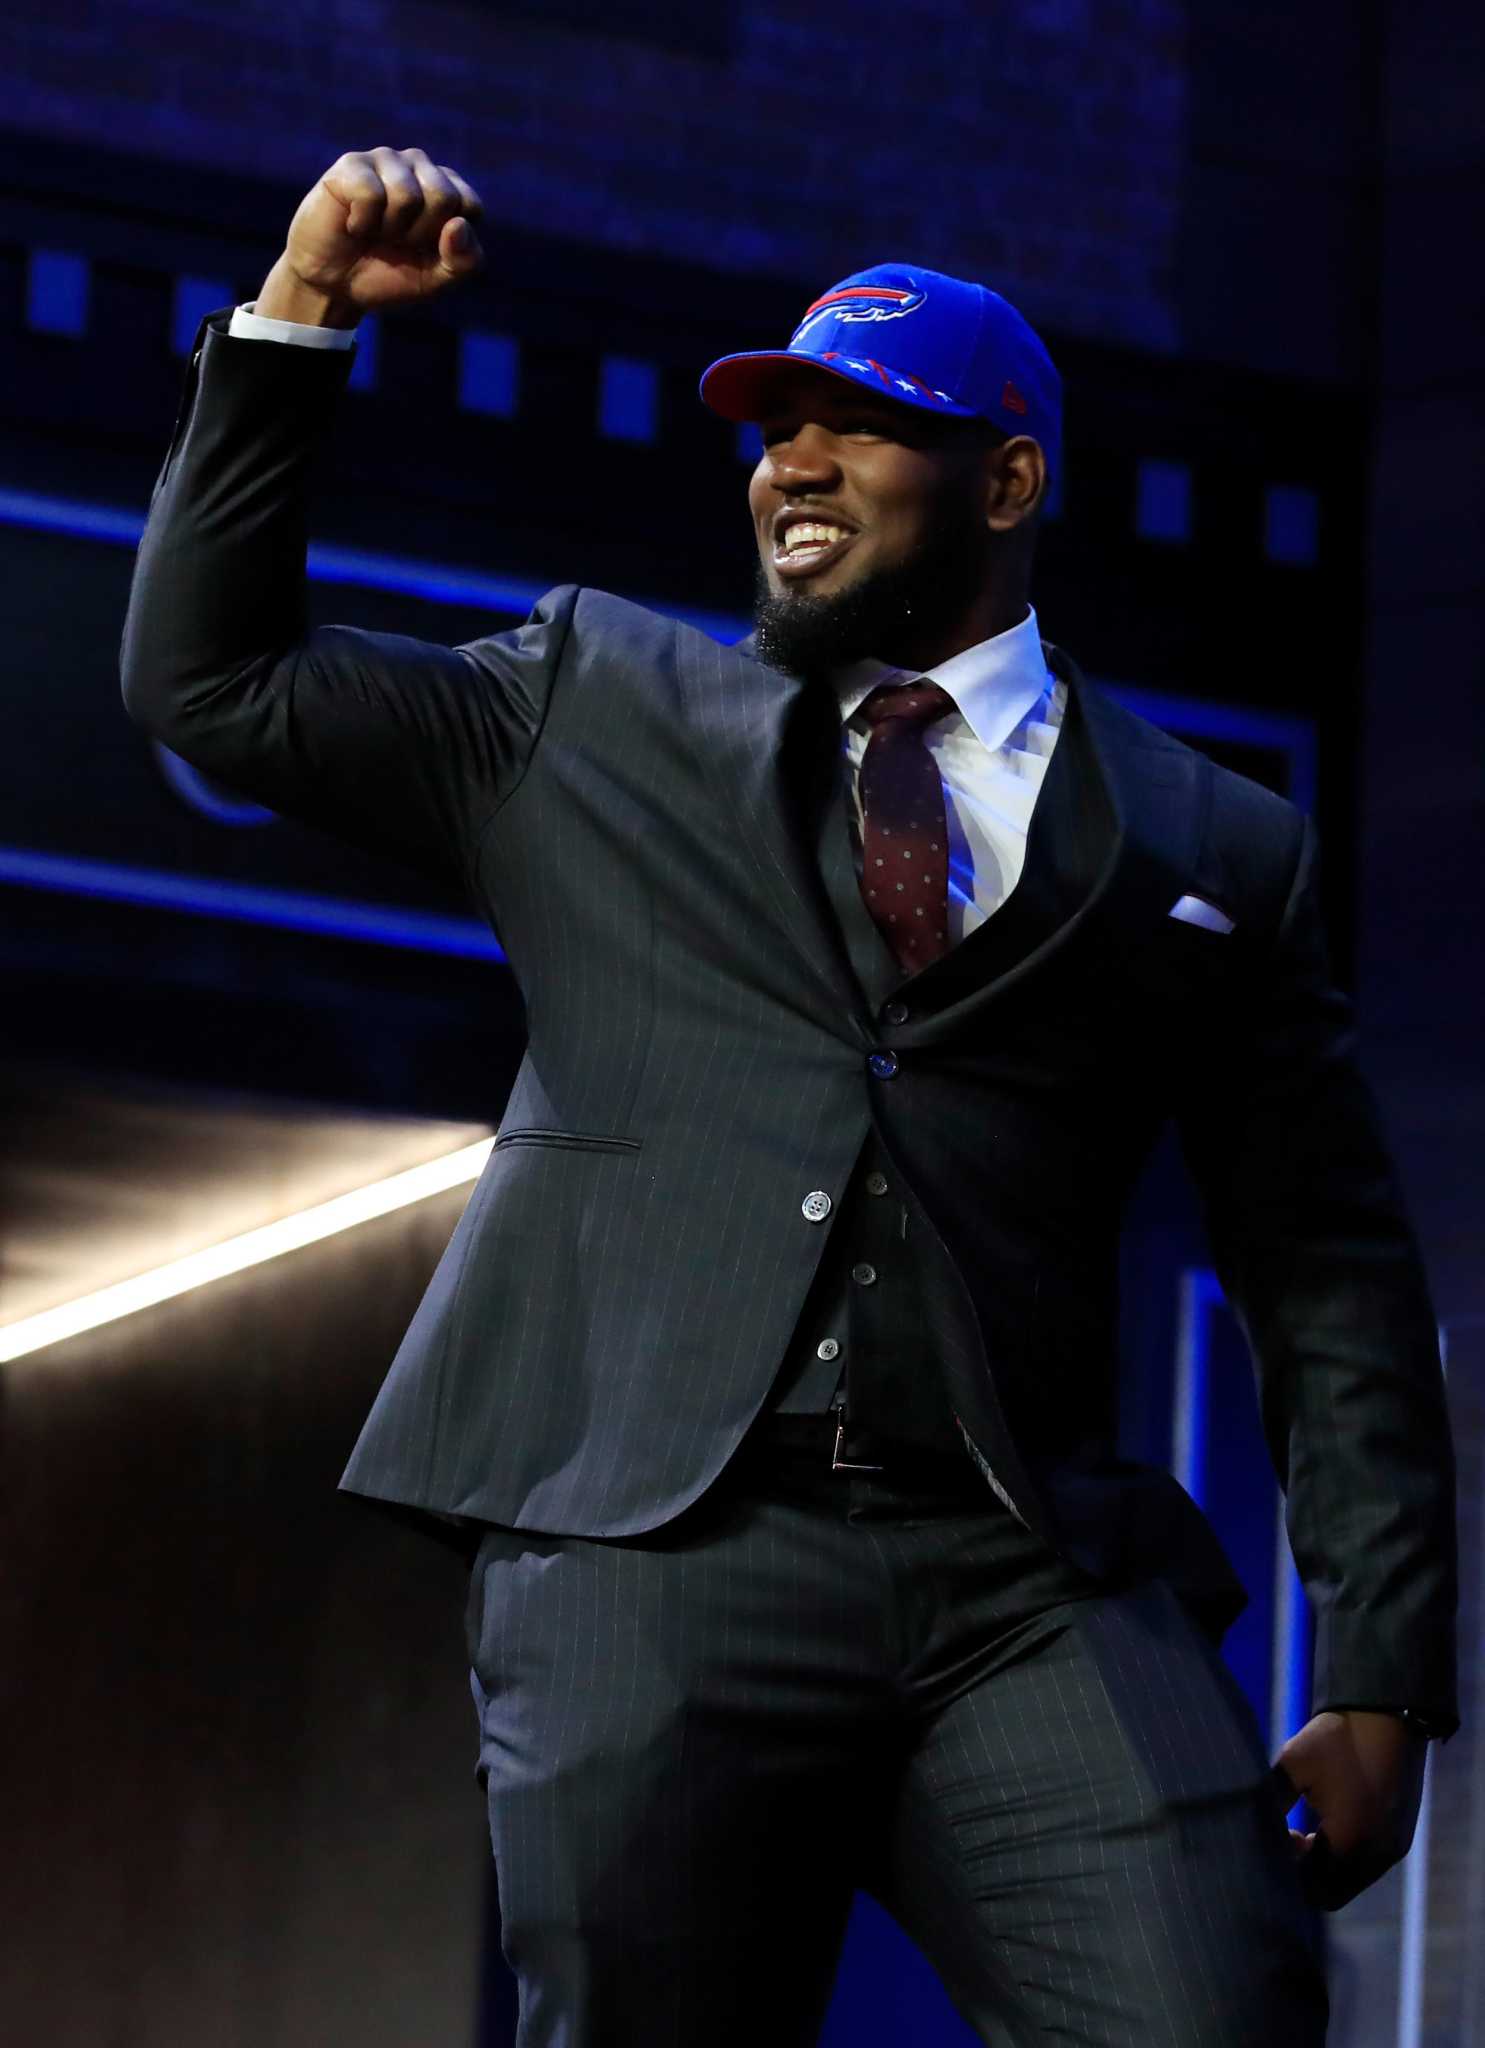 Bills draft Ed Oliver in the first round with the 9th overall pick